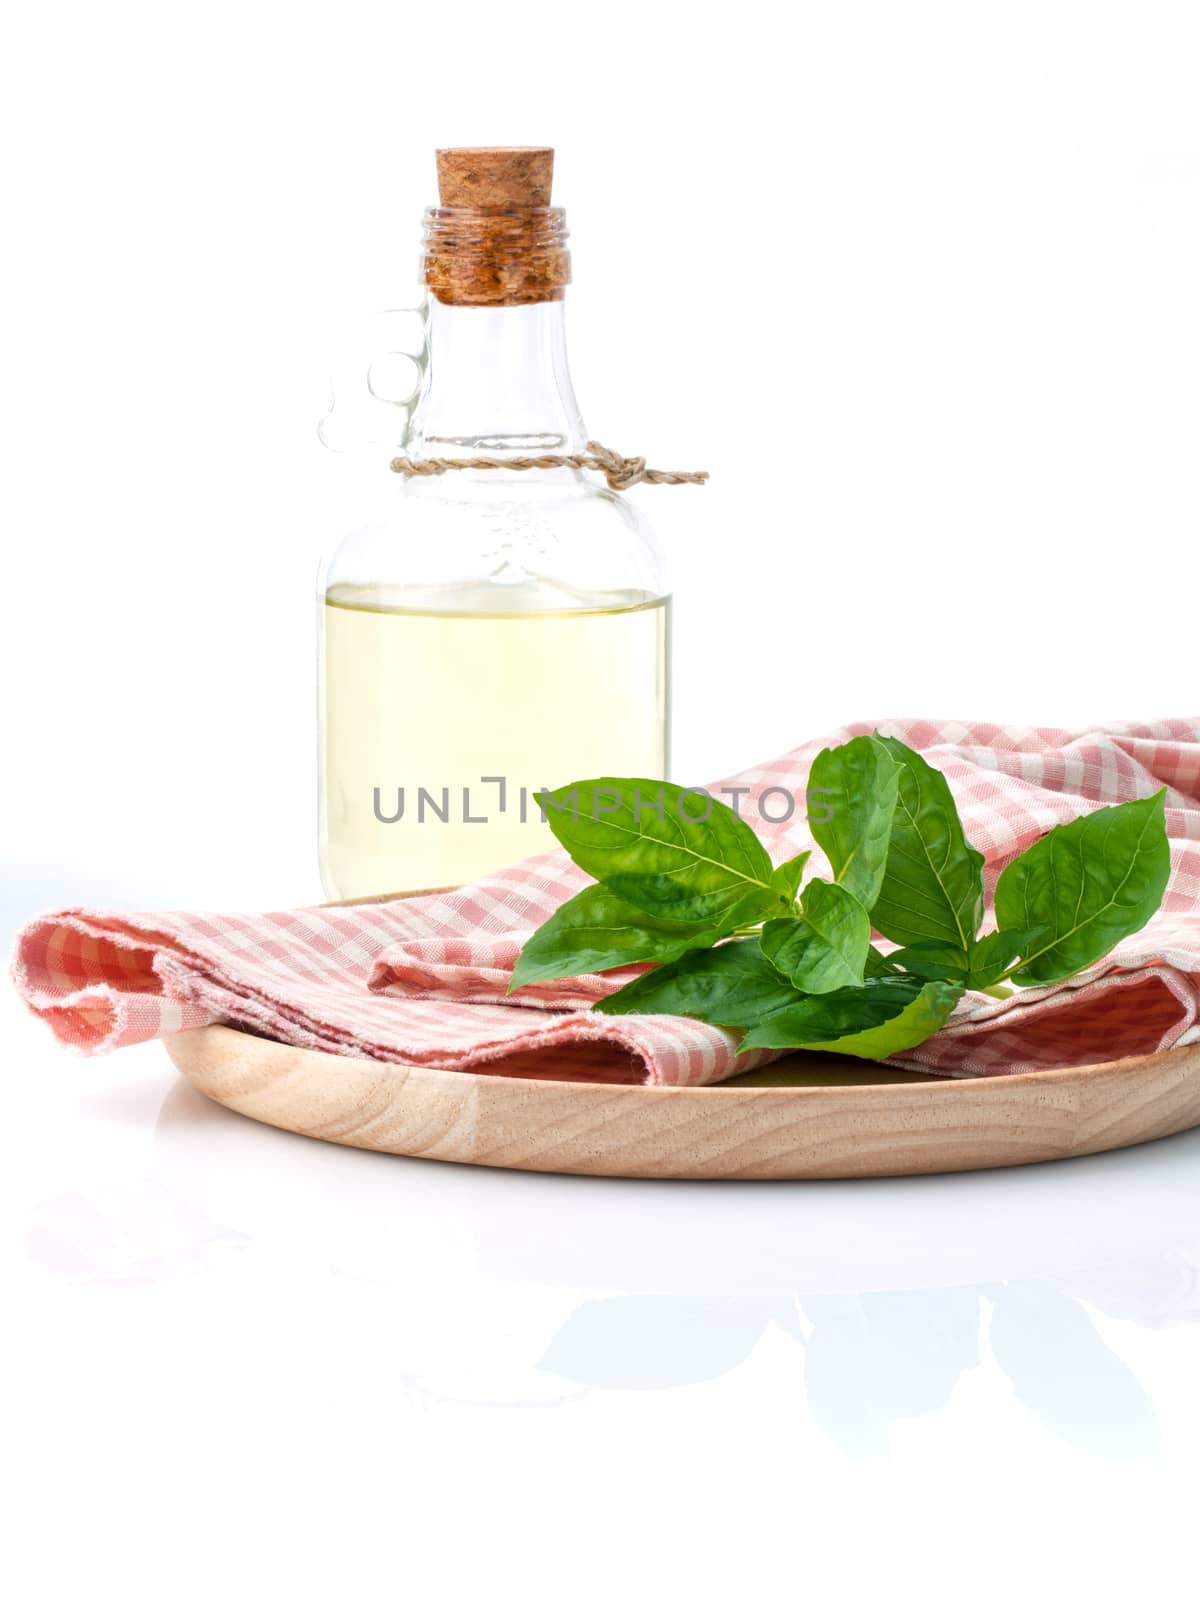 Branch of fresh  basil in wooden plate with olive oil on cutting board isolate on white background.